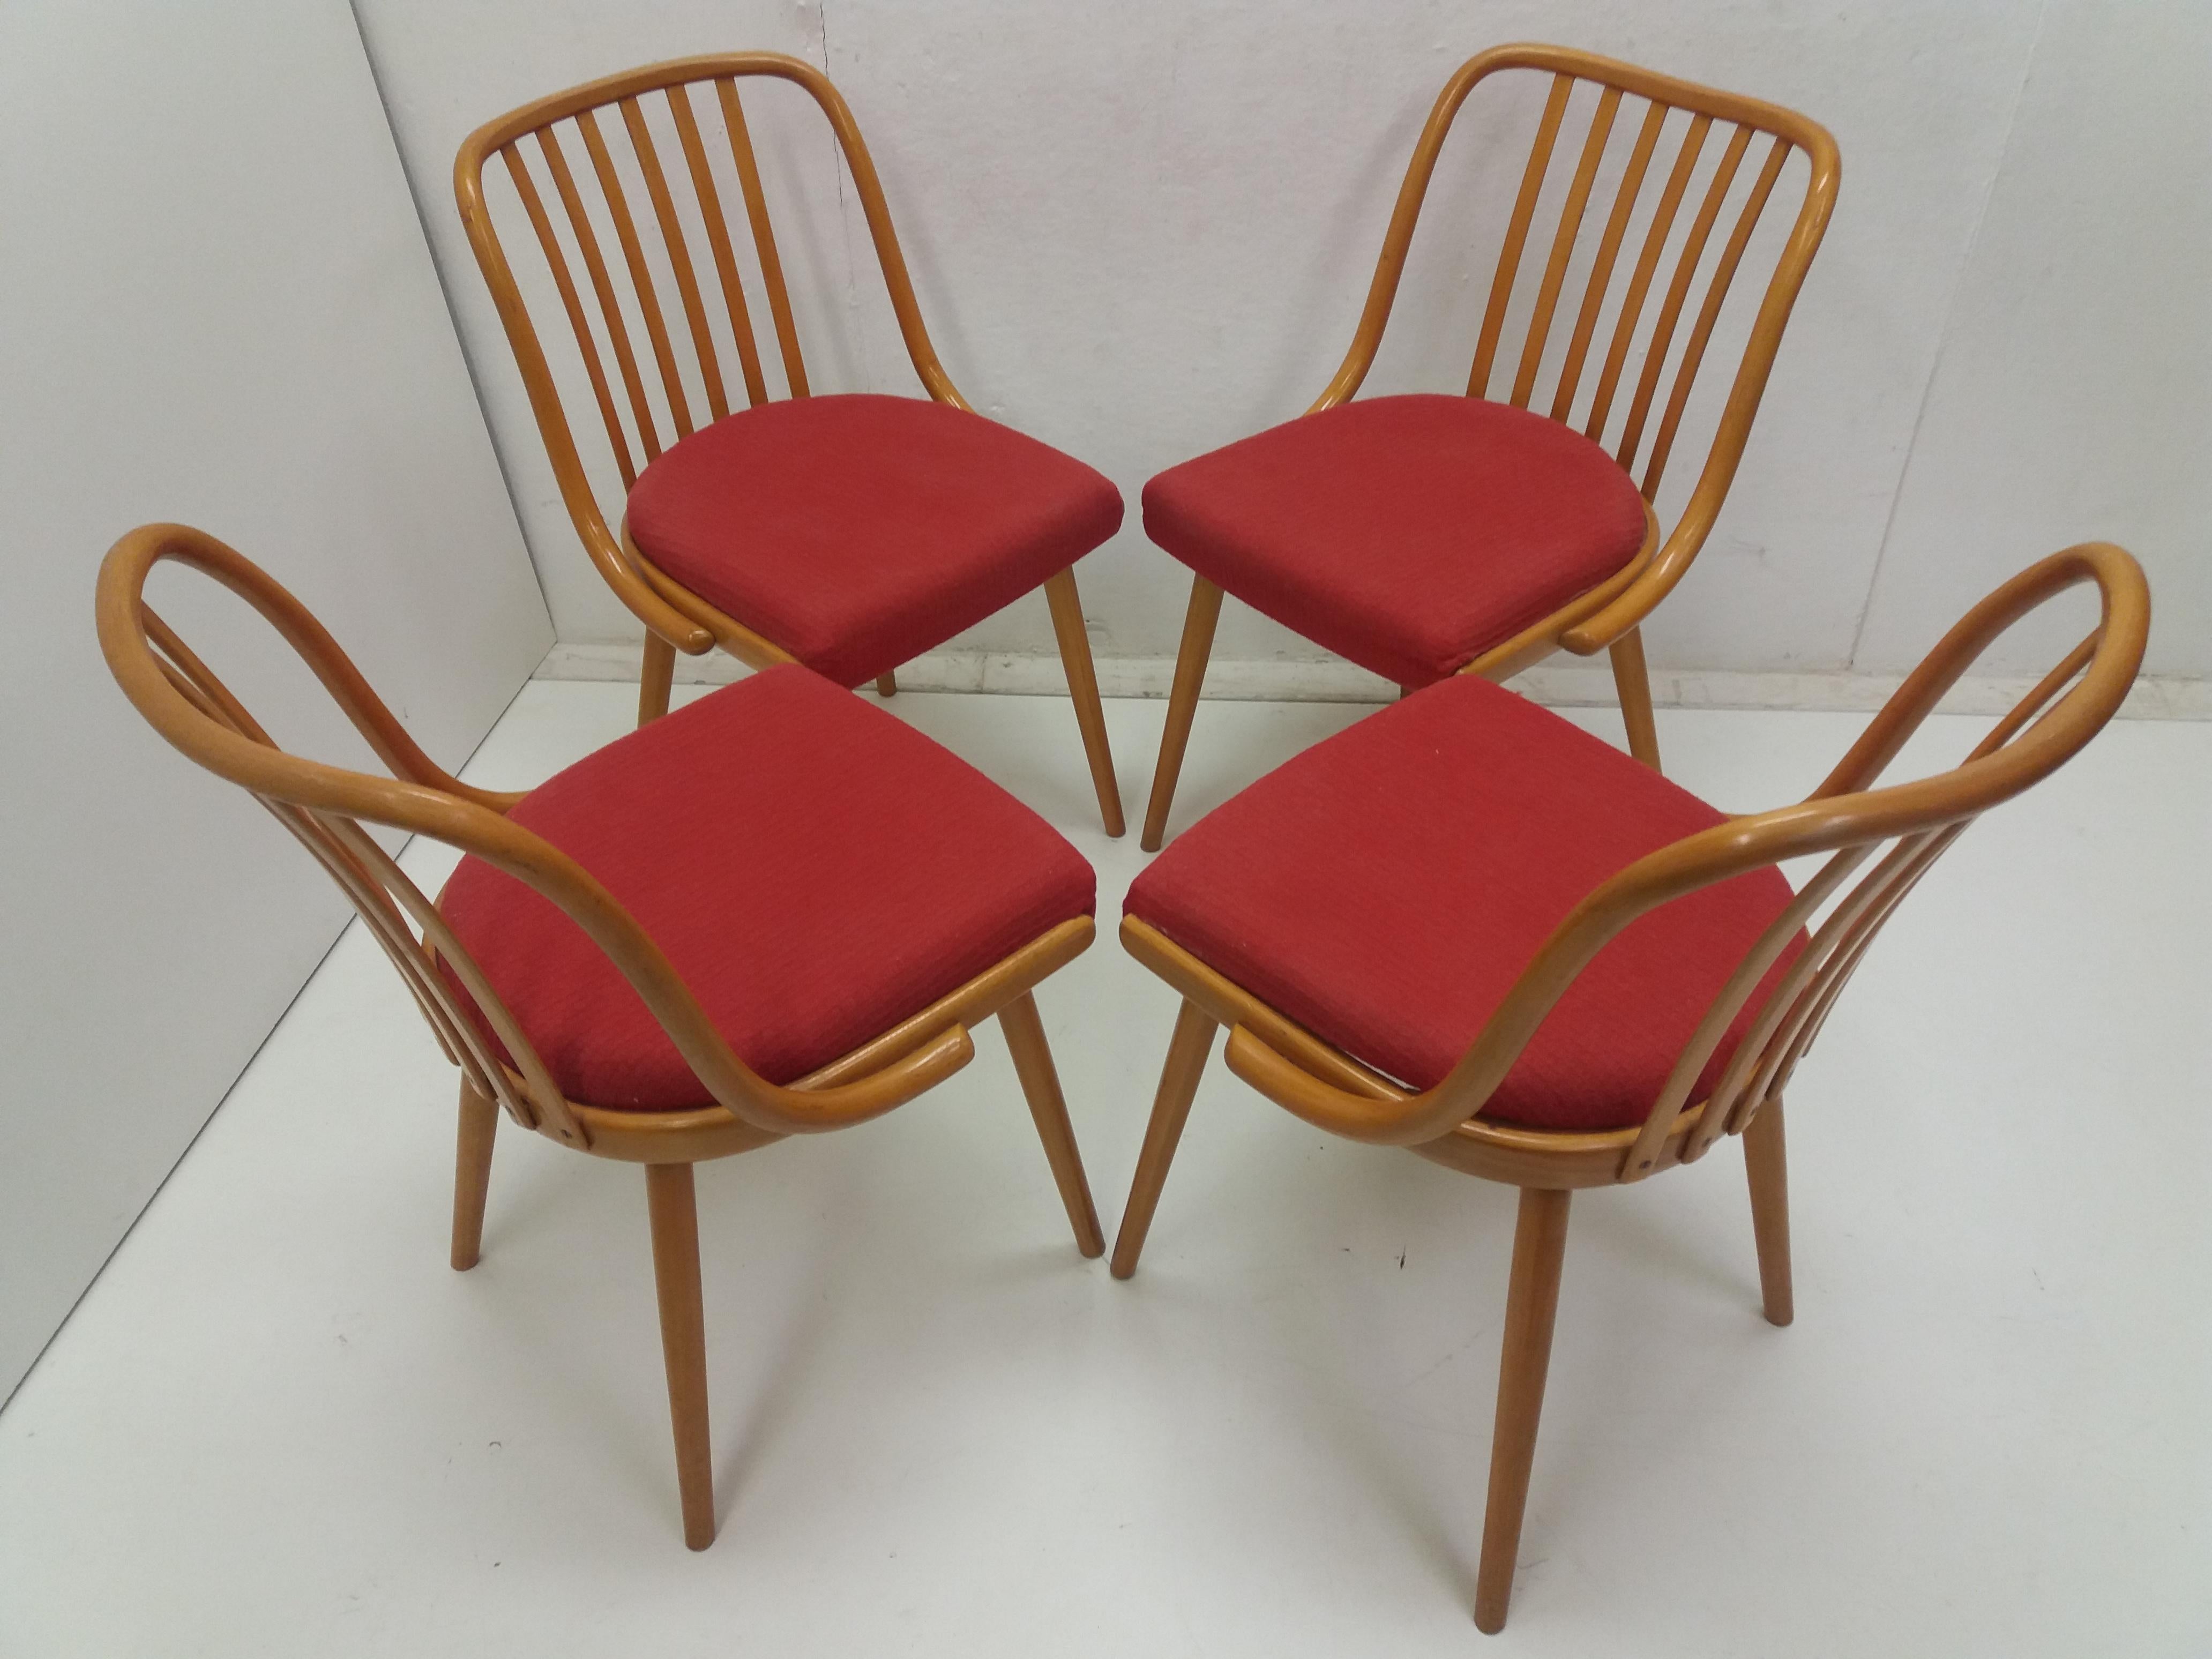 1960 Set of 4 Retro Suman Chairs and Table, Czechoslovakia For Sale 2